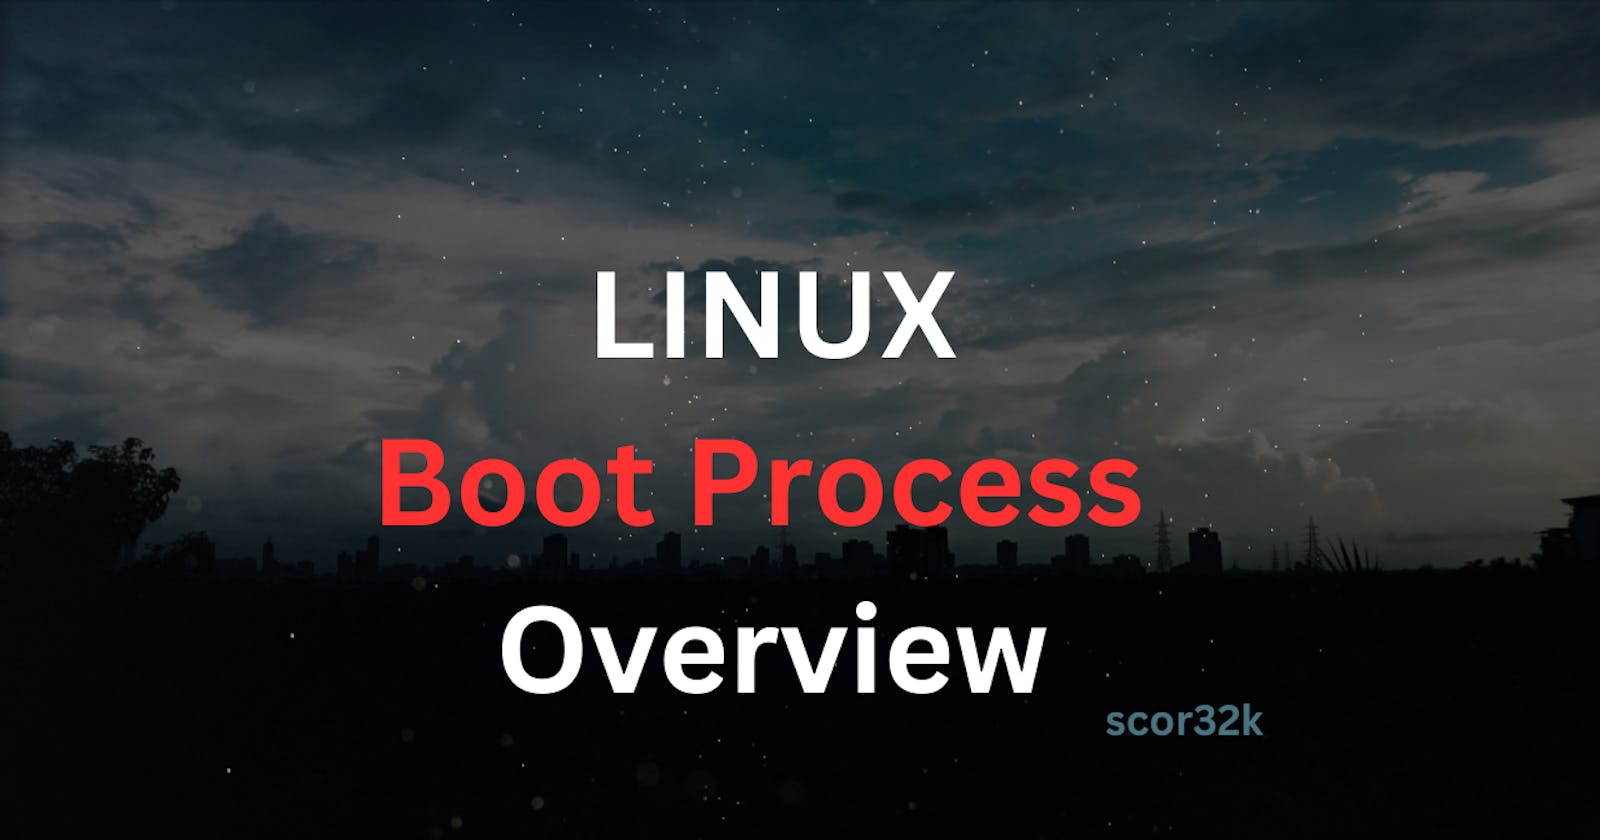 Linux Boot Process Overview